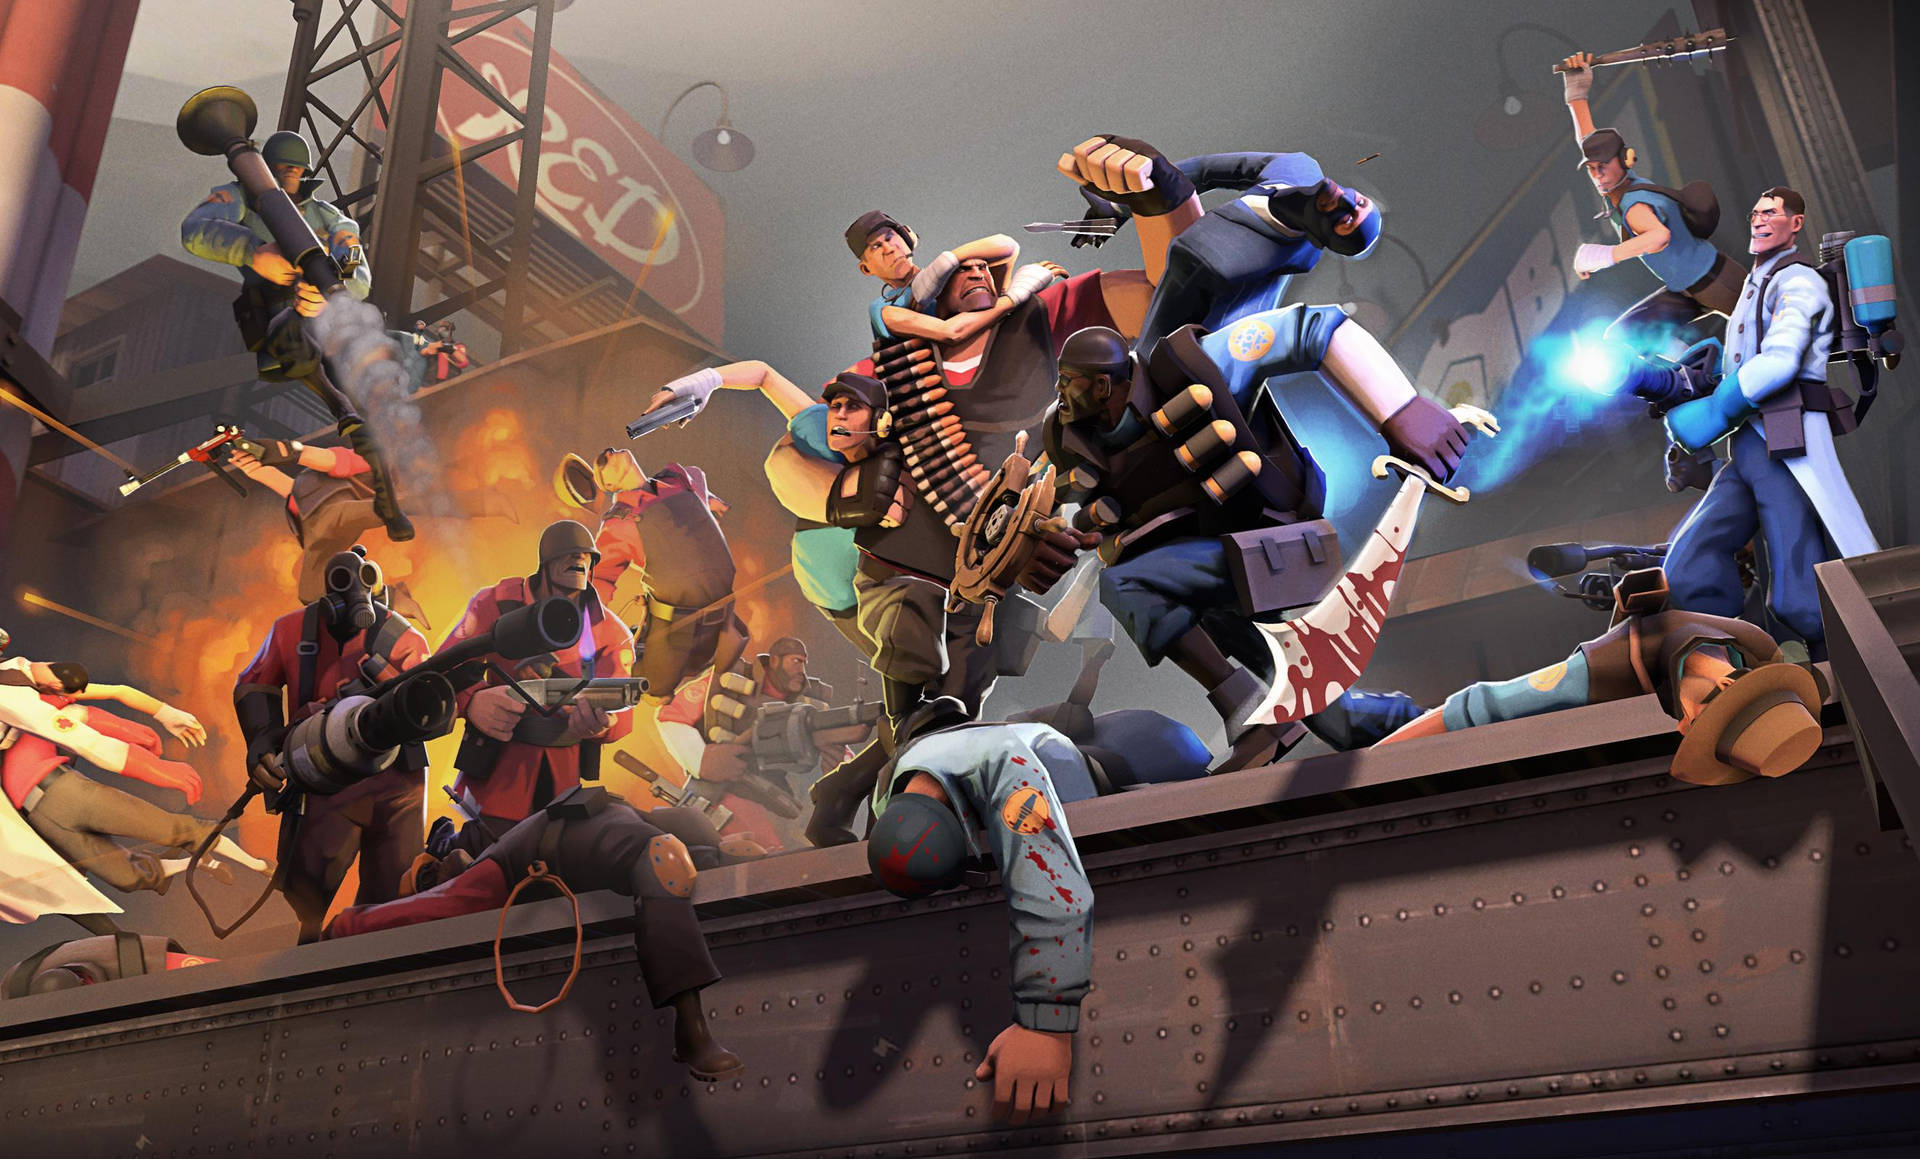 Action-packed Game Of Team Fortress 2 Background